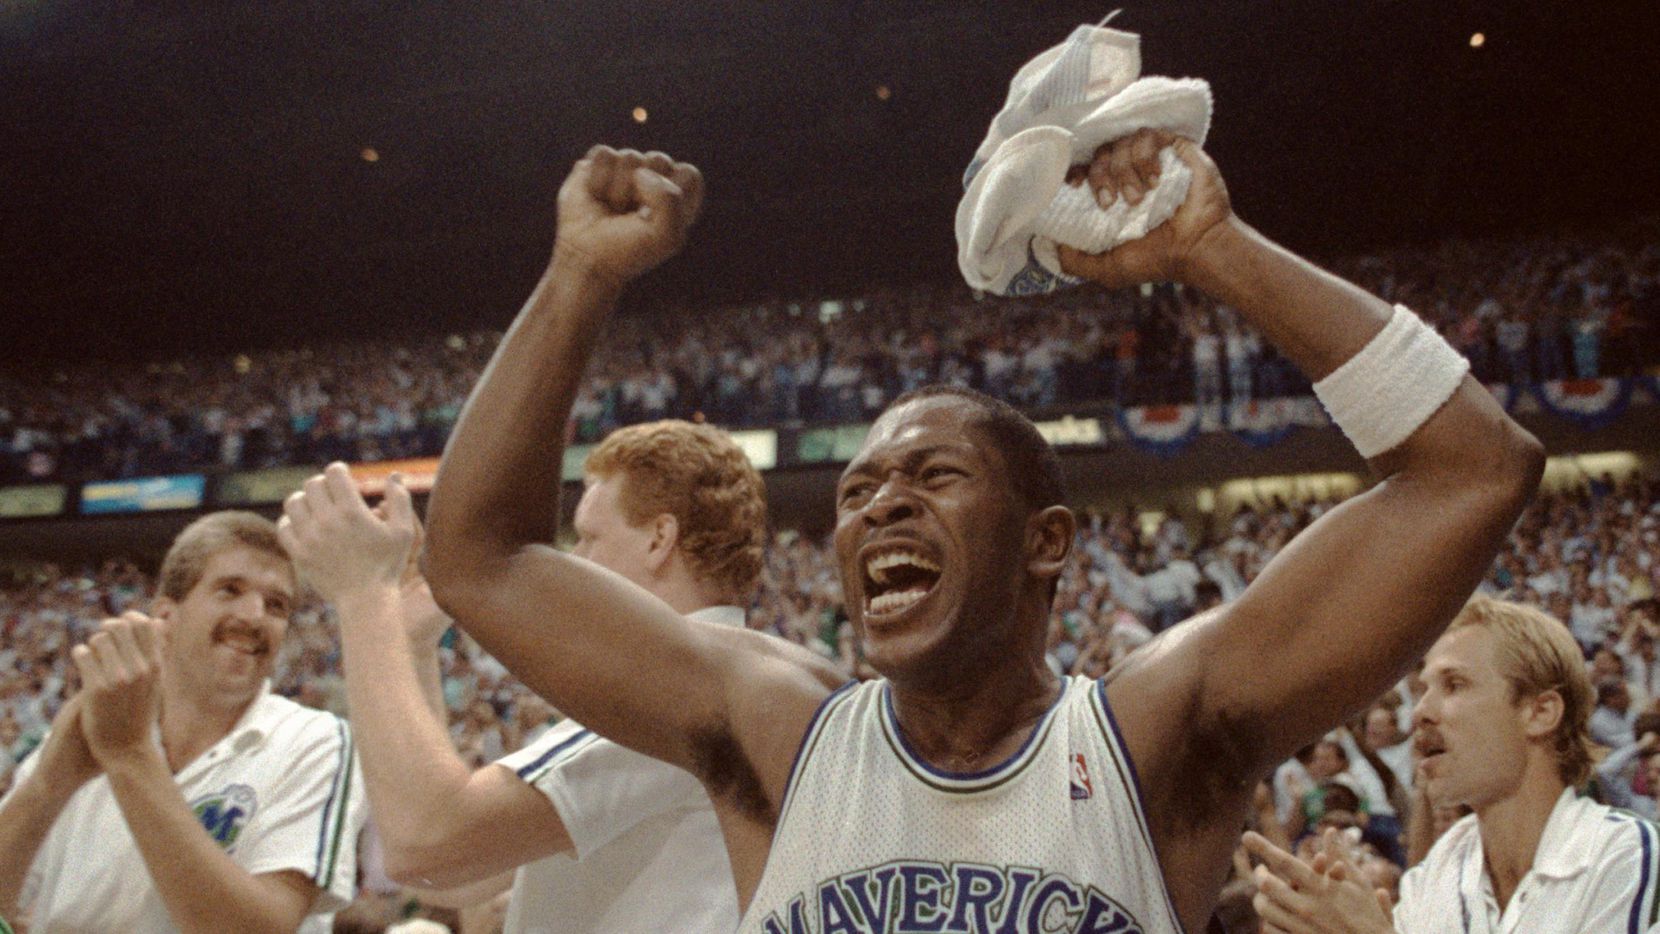 Former Mavericks star Mark Aguirre shares his side of the story about his divisive exit in Dallas